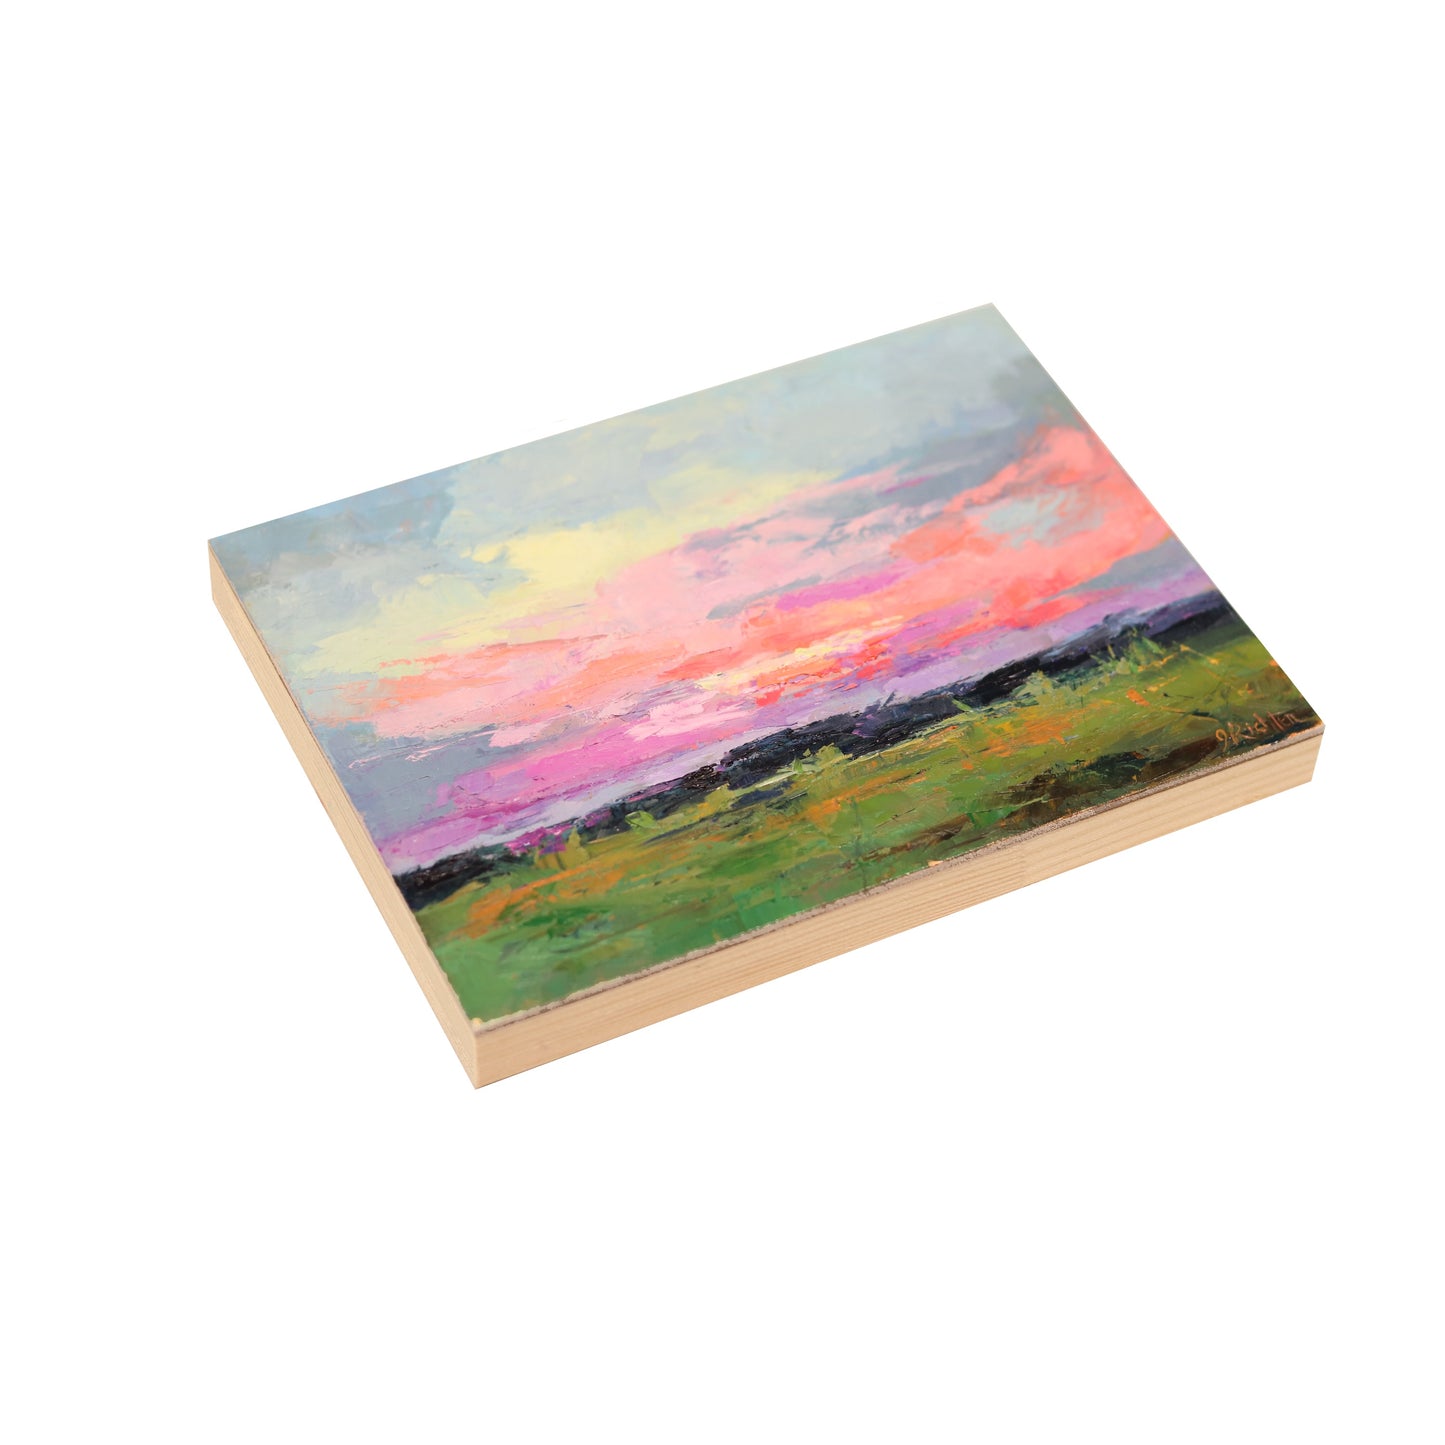 Oil painting with textured paint of bright red, pink, purple  and yellow clouds in blue sky. Olive  green landscape grass on the bottom with thin line of dark trees  in the distance.